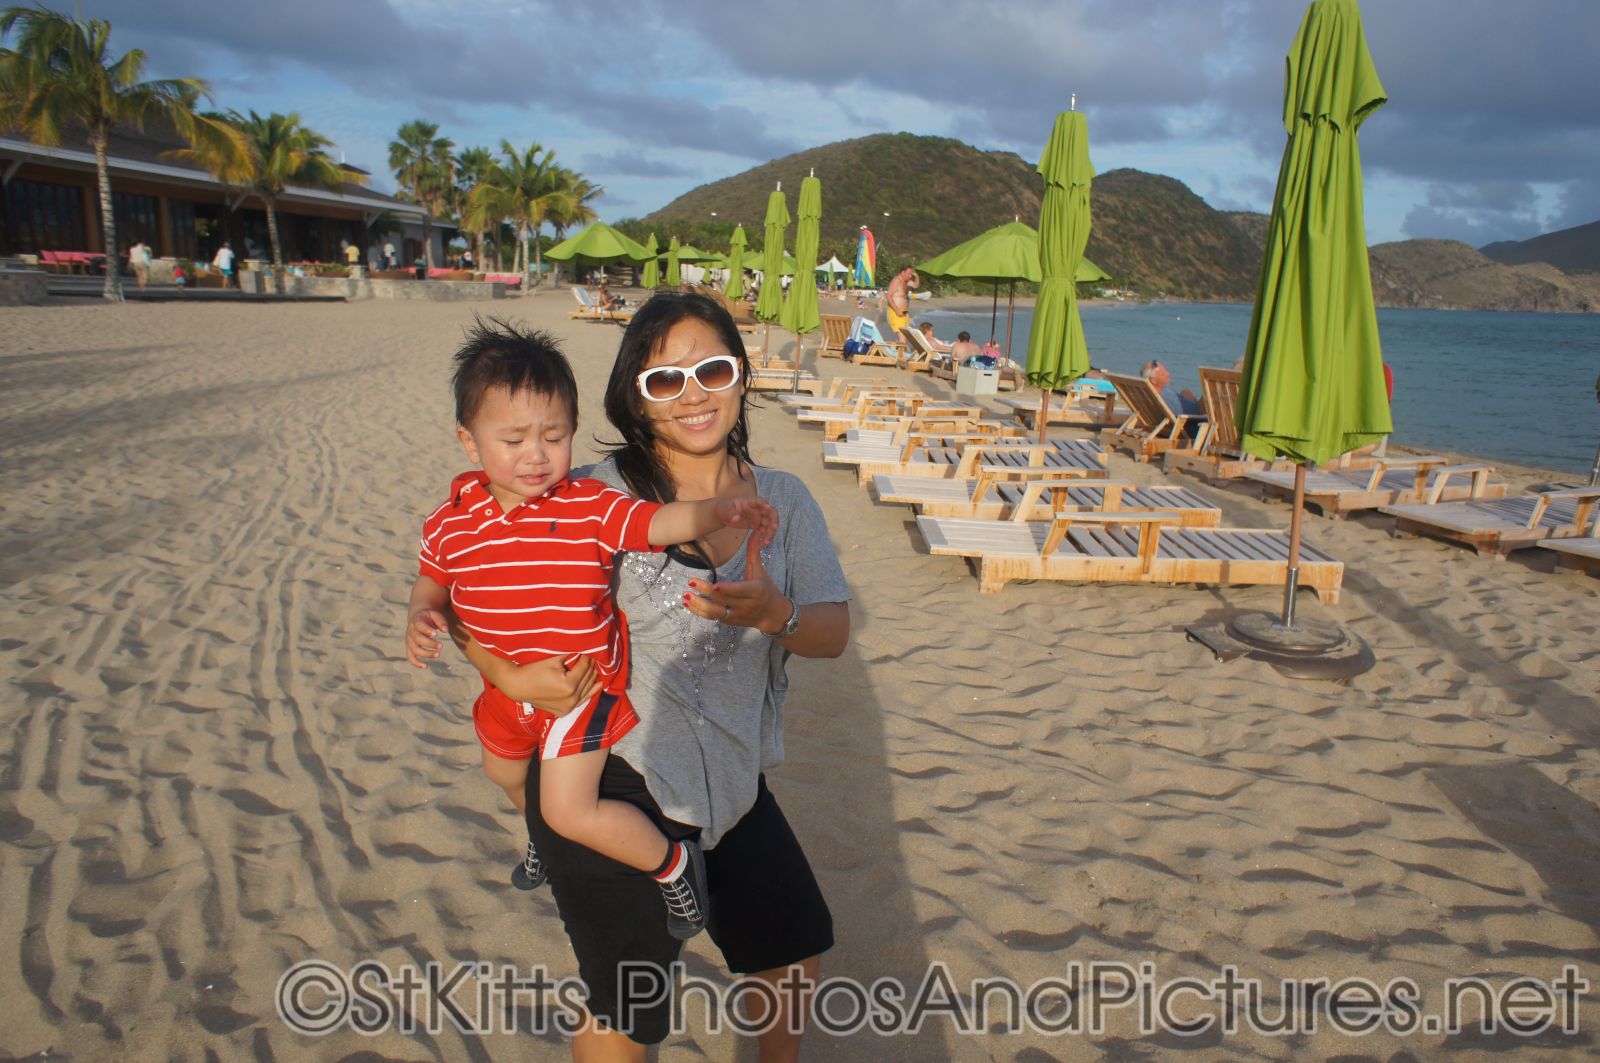 Darwin looking upset as mommy holds him at beach behind Carambola Restaurant in St Kitts.jpg
